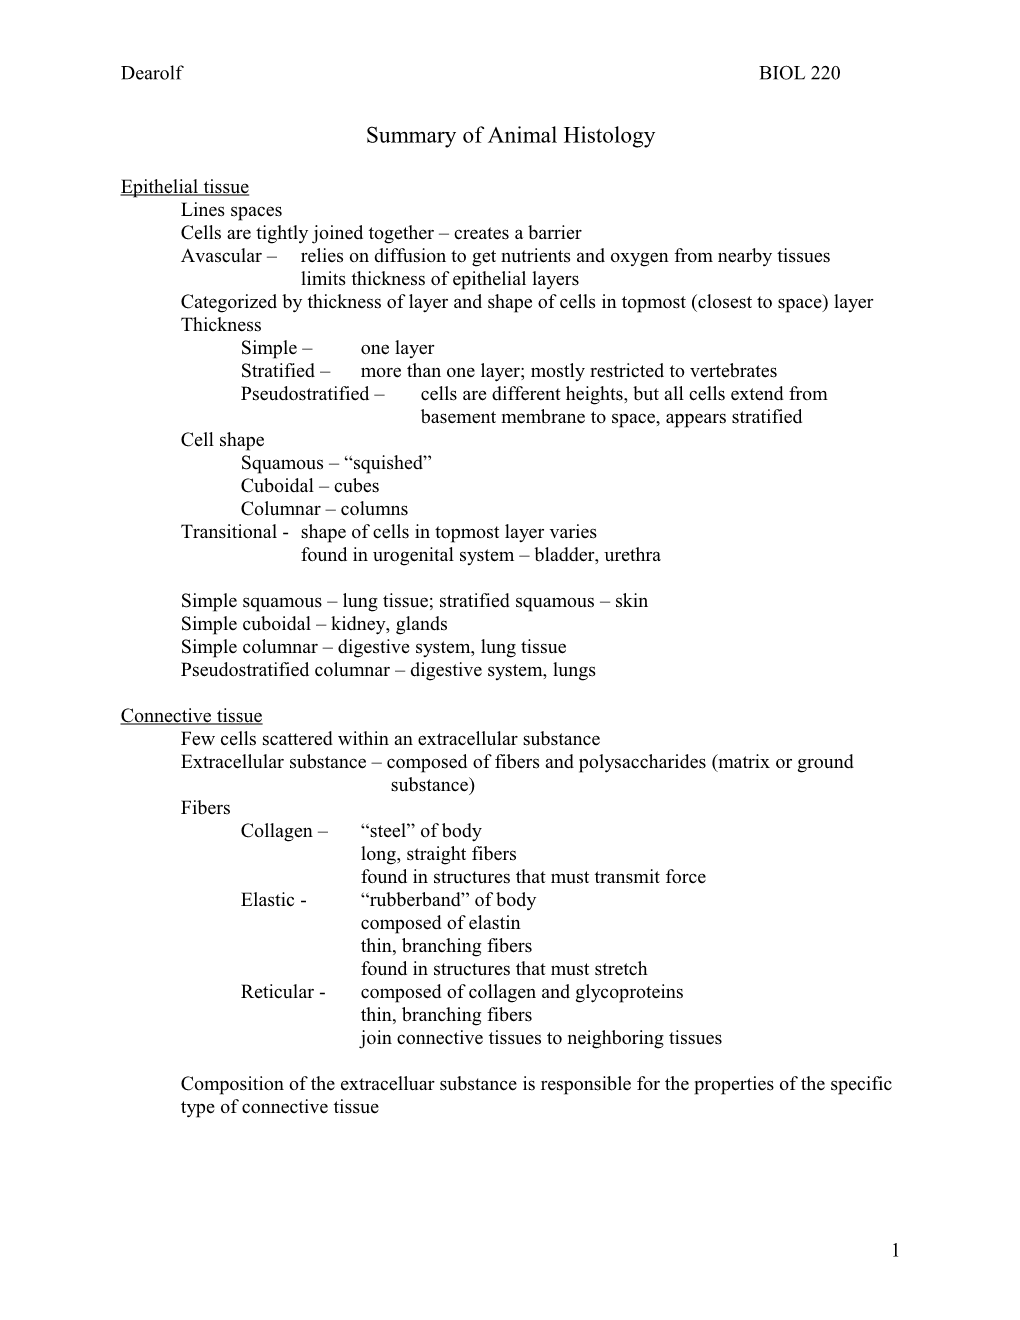 Review Sheet for Animal Histology